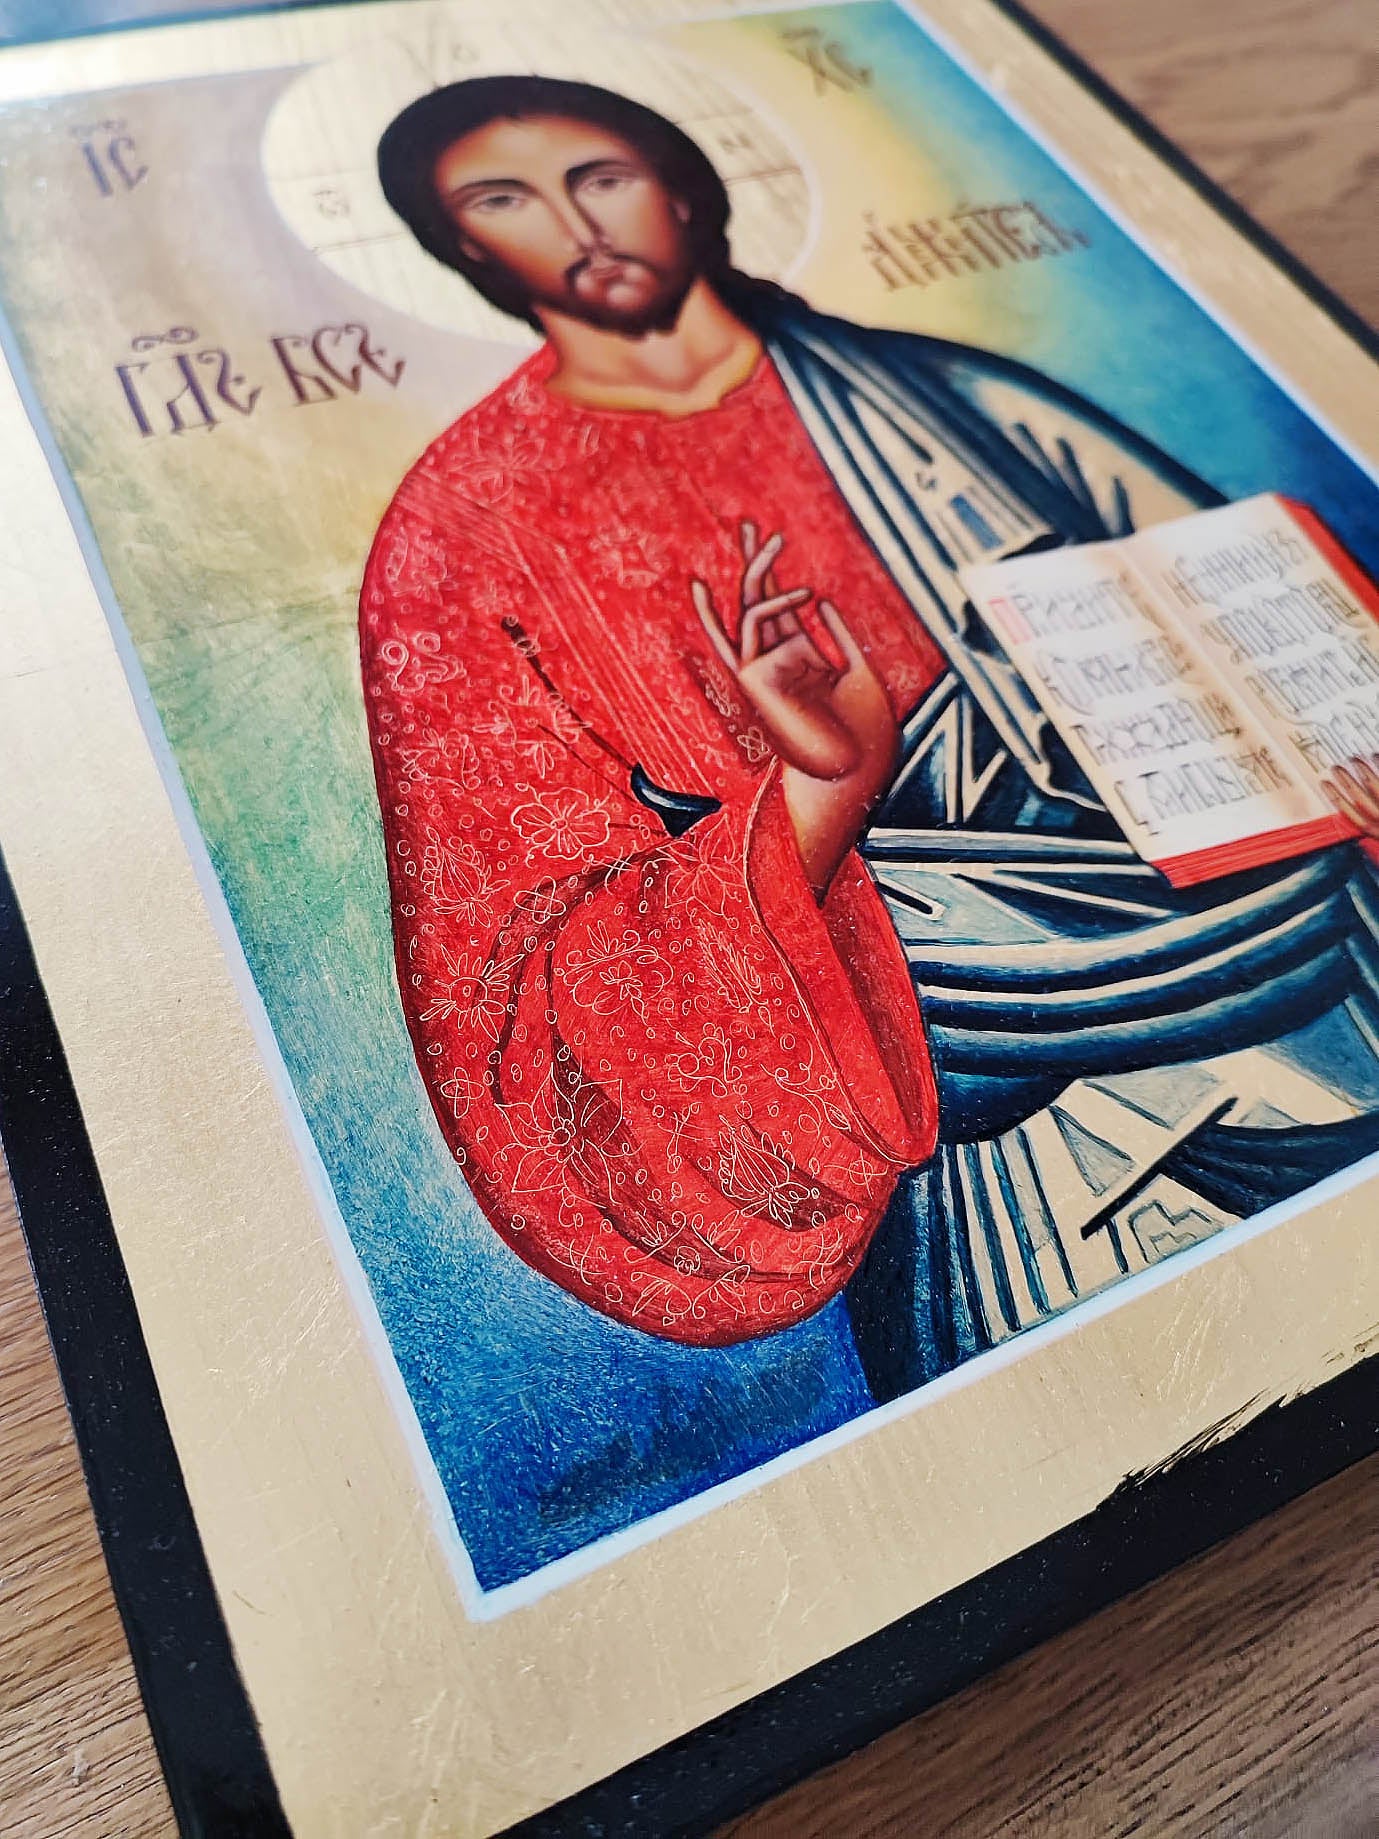 Hand Painted Icon of Christ Panthocrato